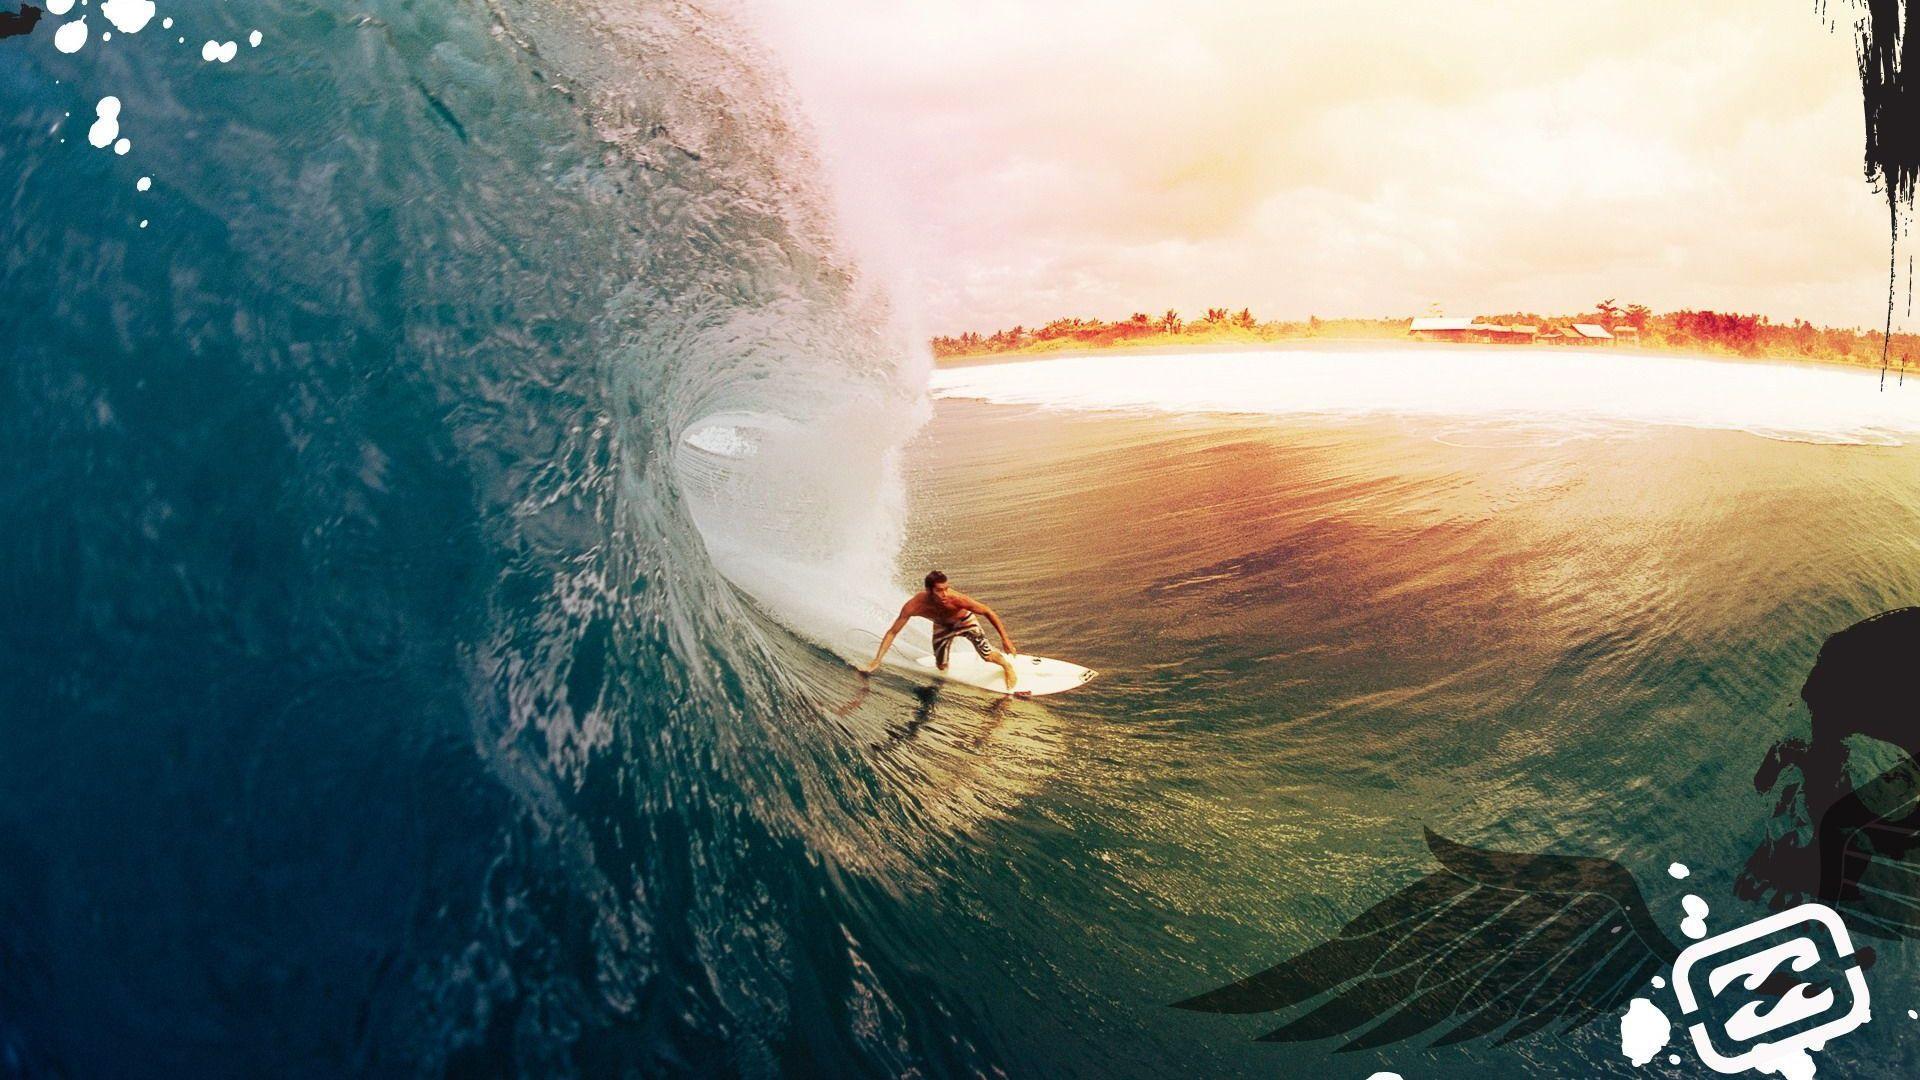 1920 x 1080 · jpeg - Surfing HD Wallpapers Backgrounds Wallpaper | Surfing, Surfing waves ...